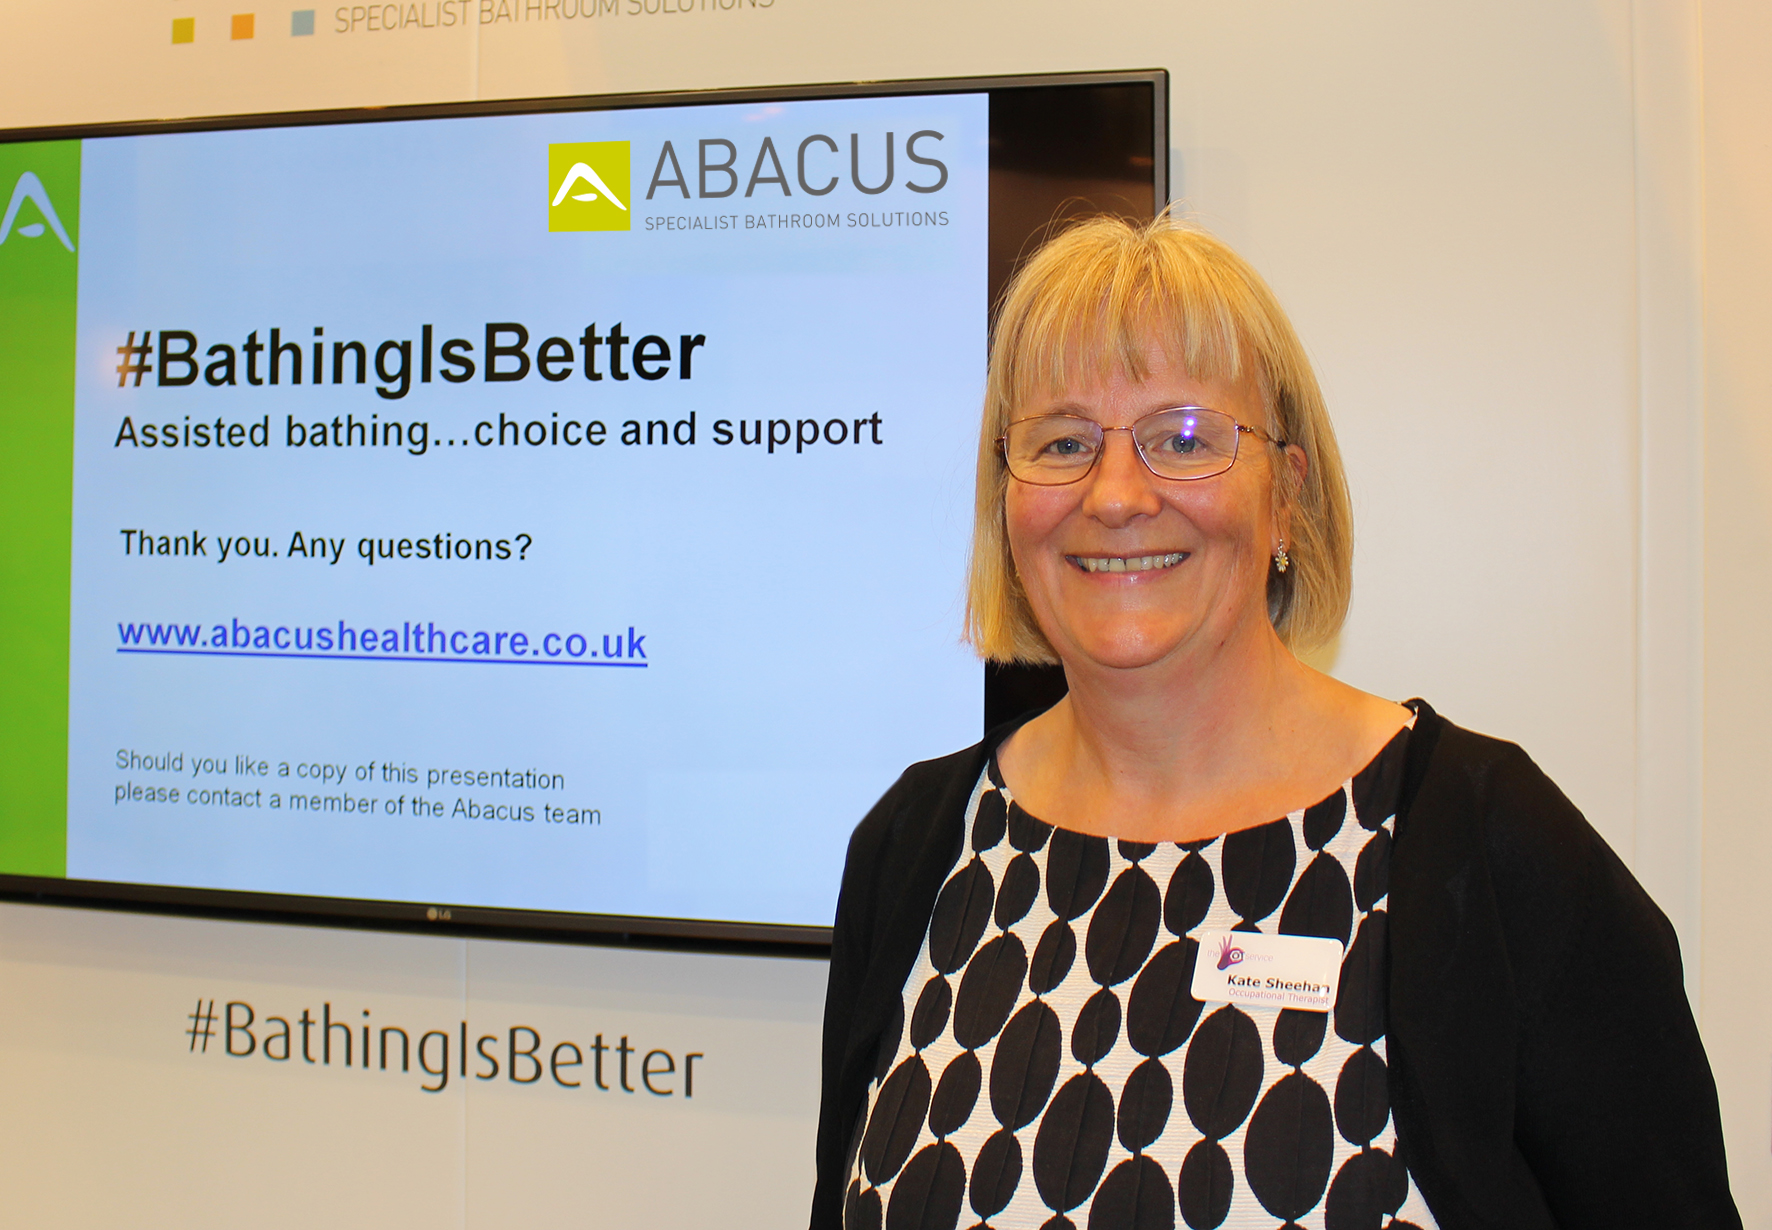 Respected OT Kate Sheehan to present “Bathing is Better” seminars with Abacus Specialist Bathroom Solutions at OT Show